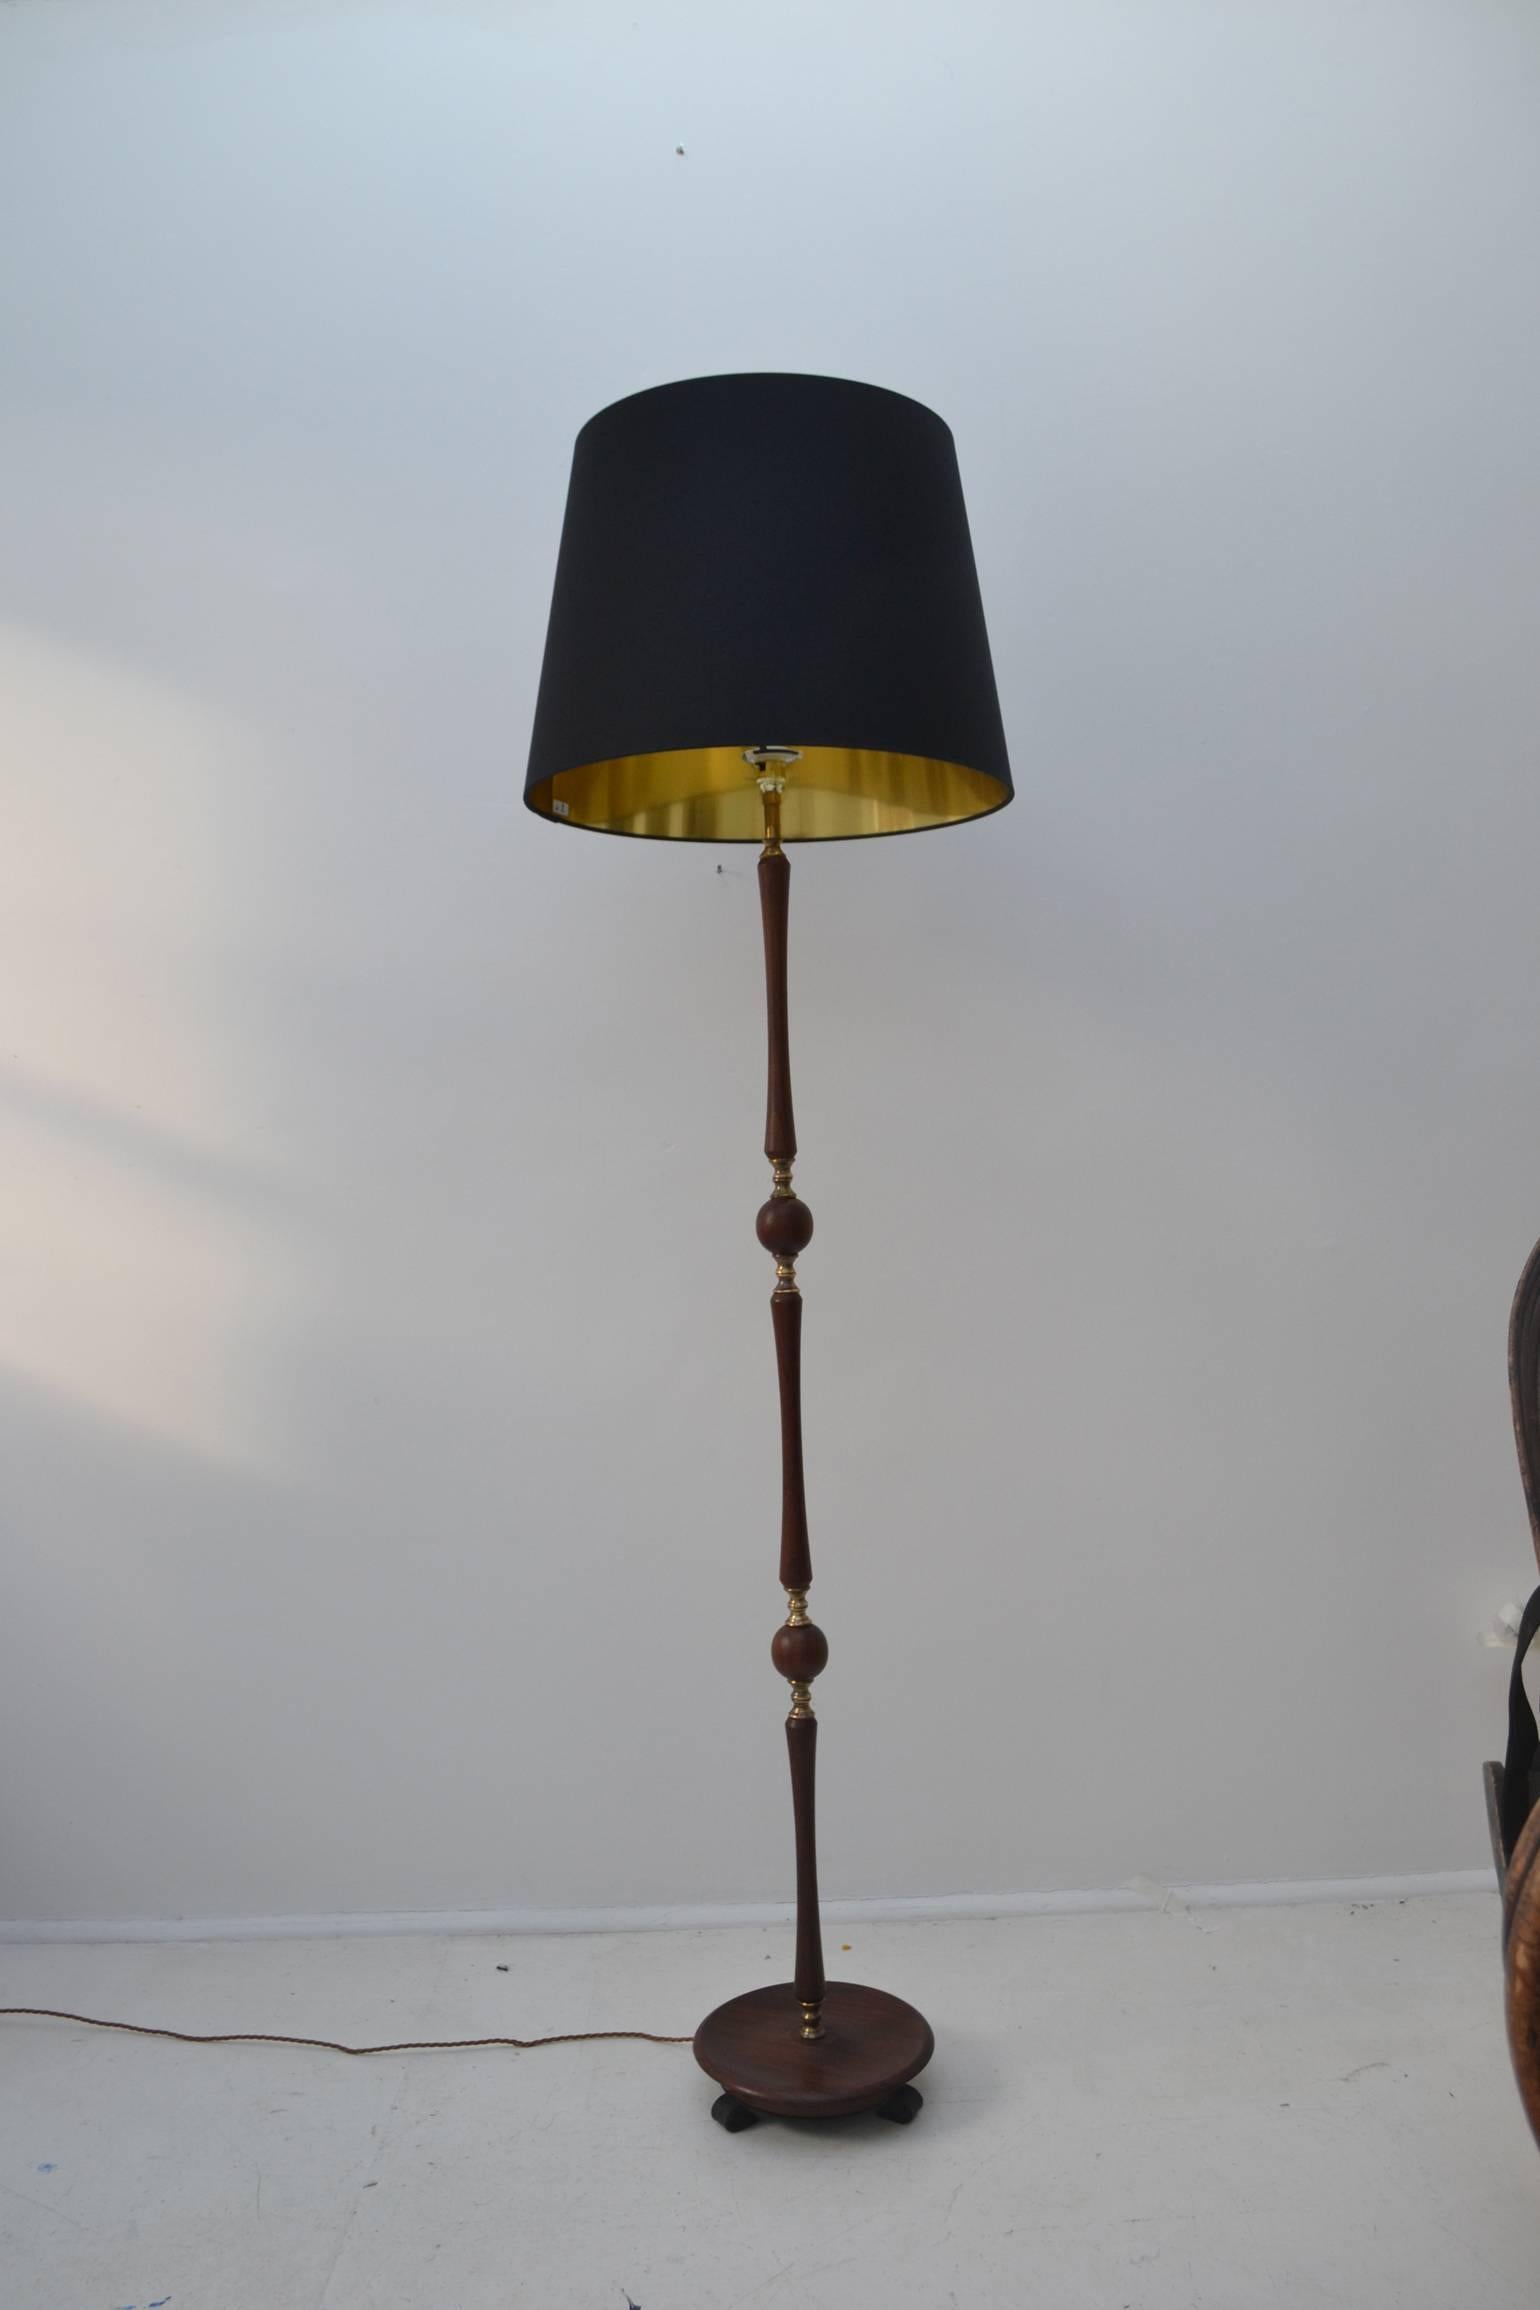 Elegant curvaceous floor lamp in alternate sections of teak and brass 1960's with new silk shade black silk shade.
Dimensions frame; diameter 28cm, height 155 cm
Dimensions lamp with shade; diameter 45cm, height 185cm.
Rewired with bronze colour